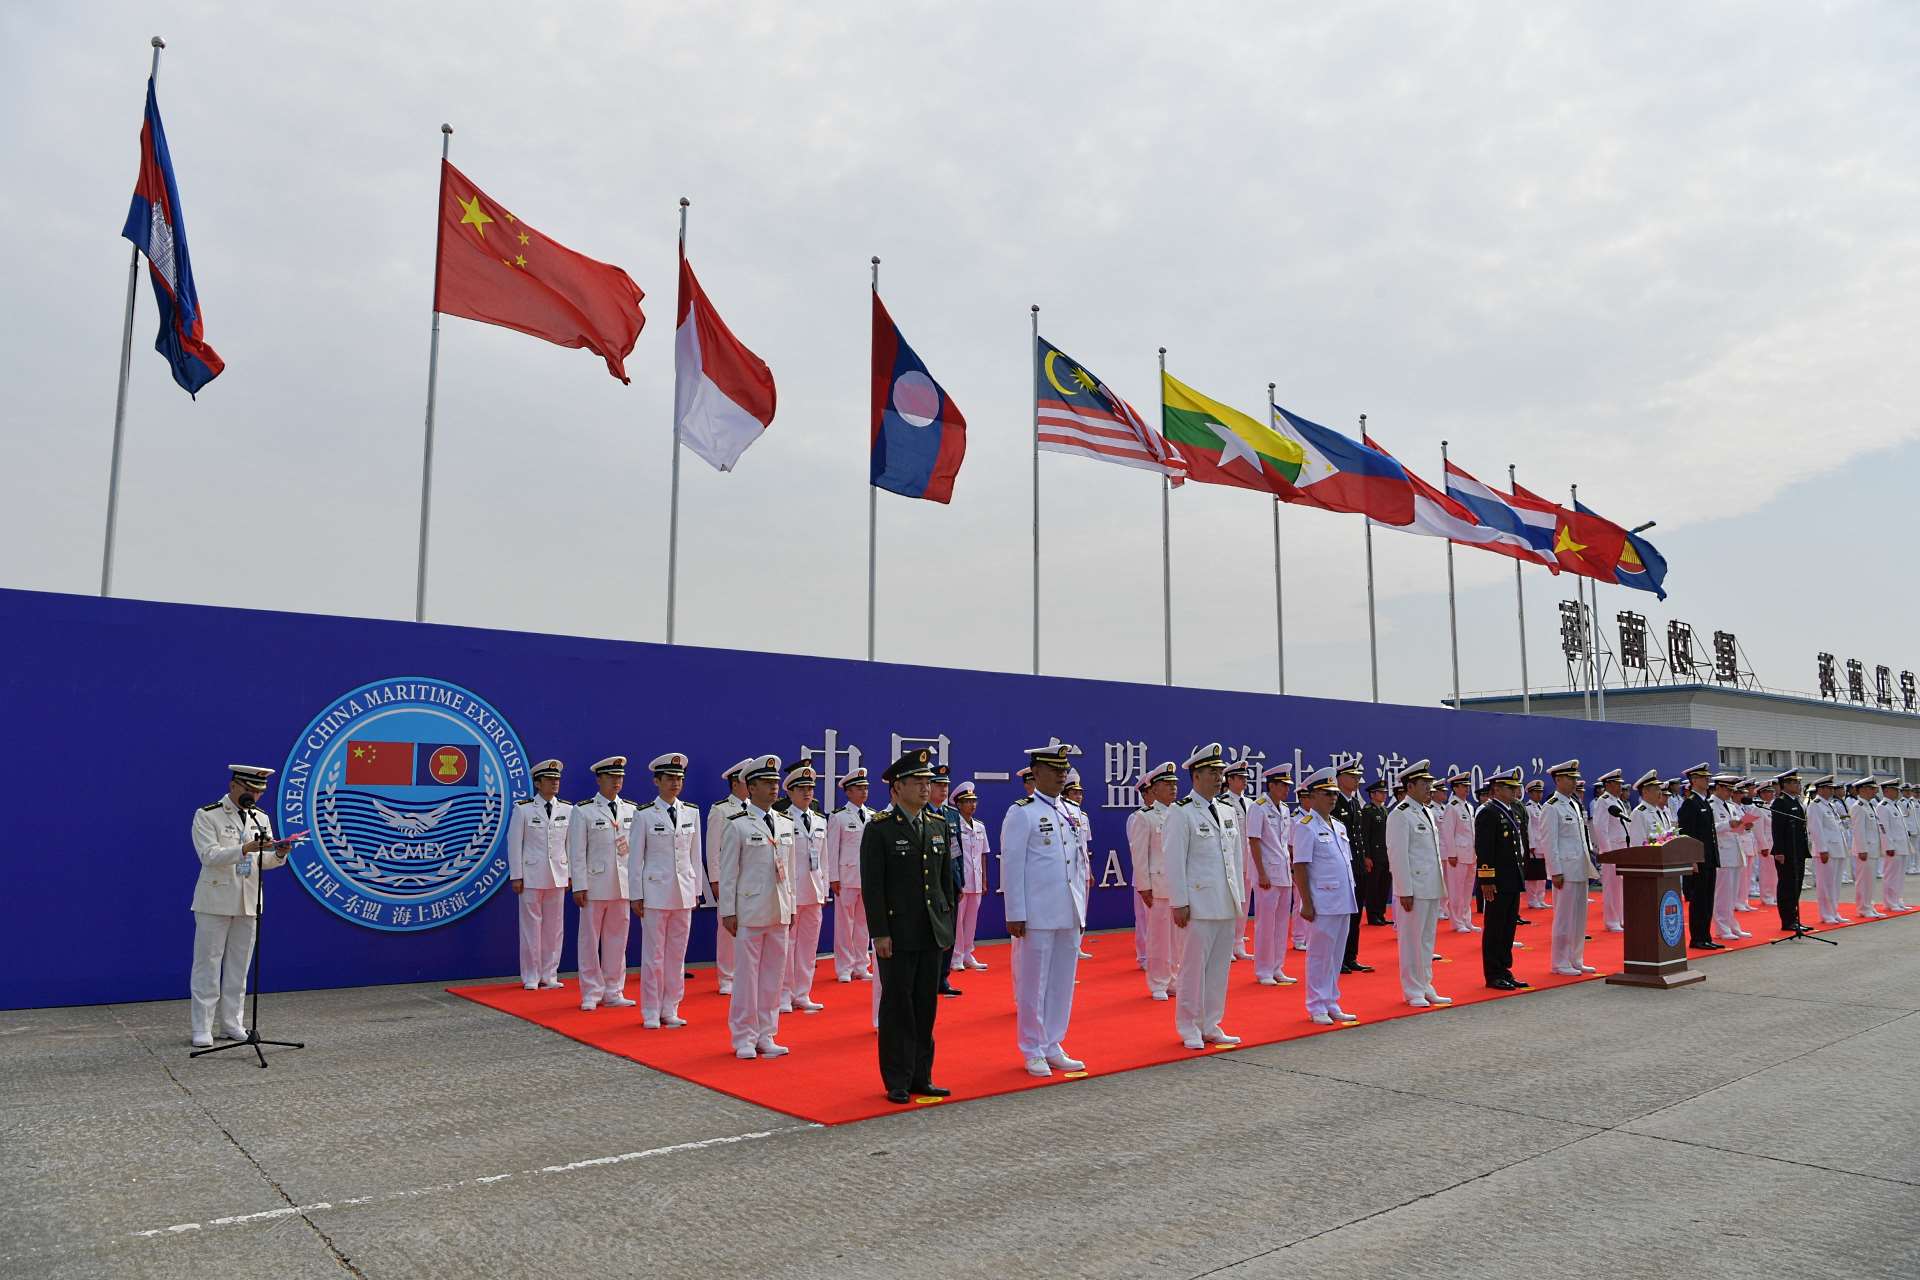 Representatives from the ASEAN and China navies during the closing ceremony of the ASEAN-China Maritime Exercise in Zhanjiang, China.